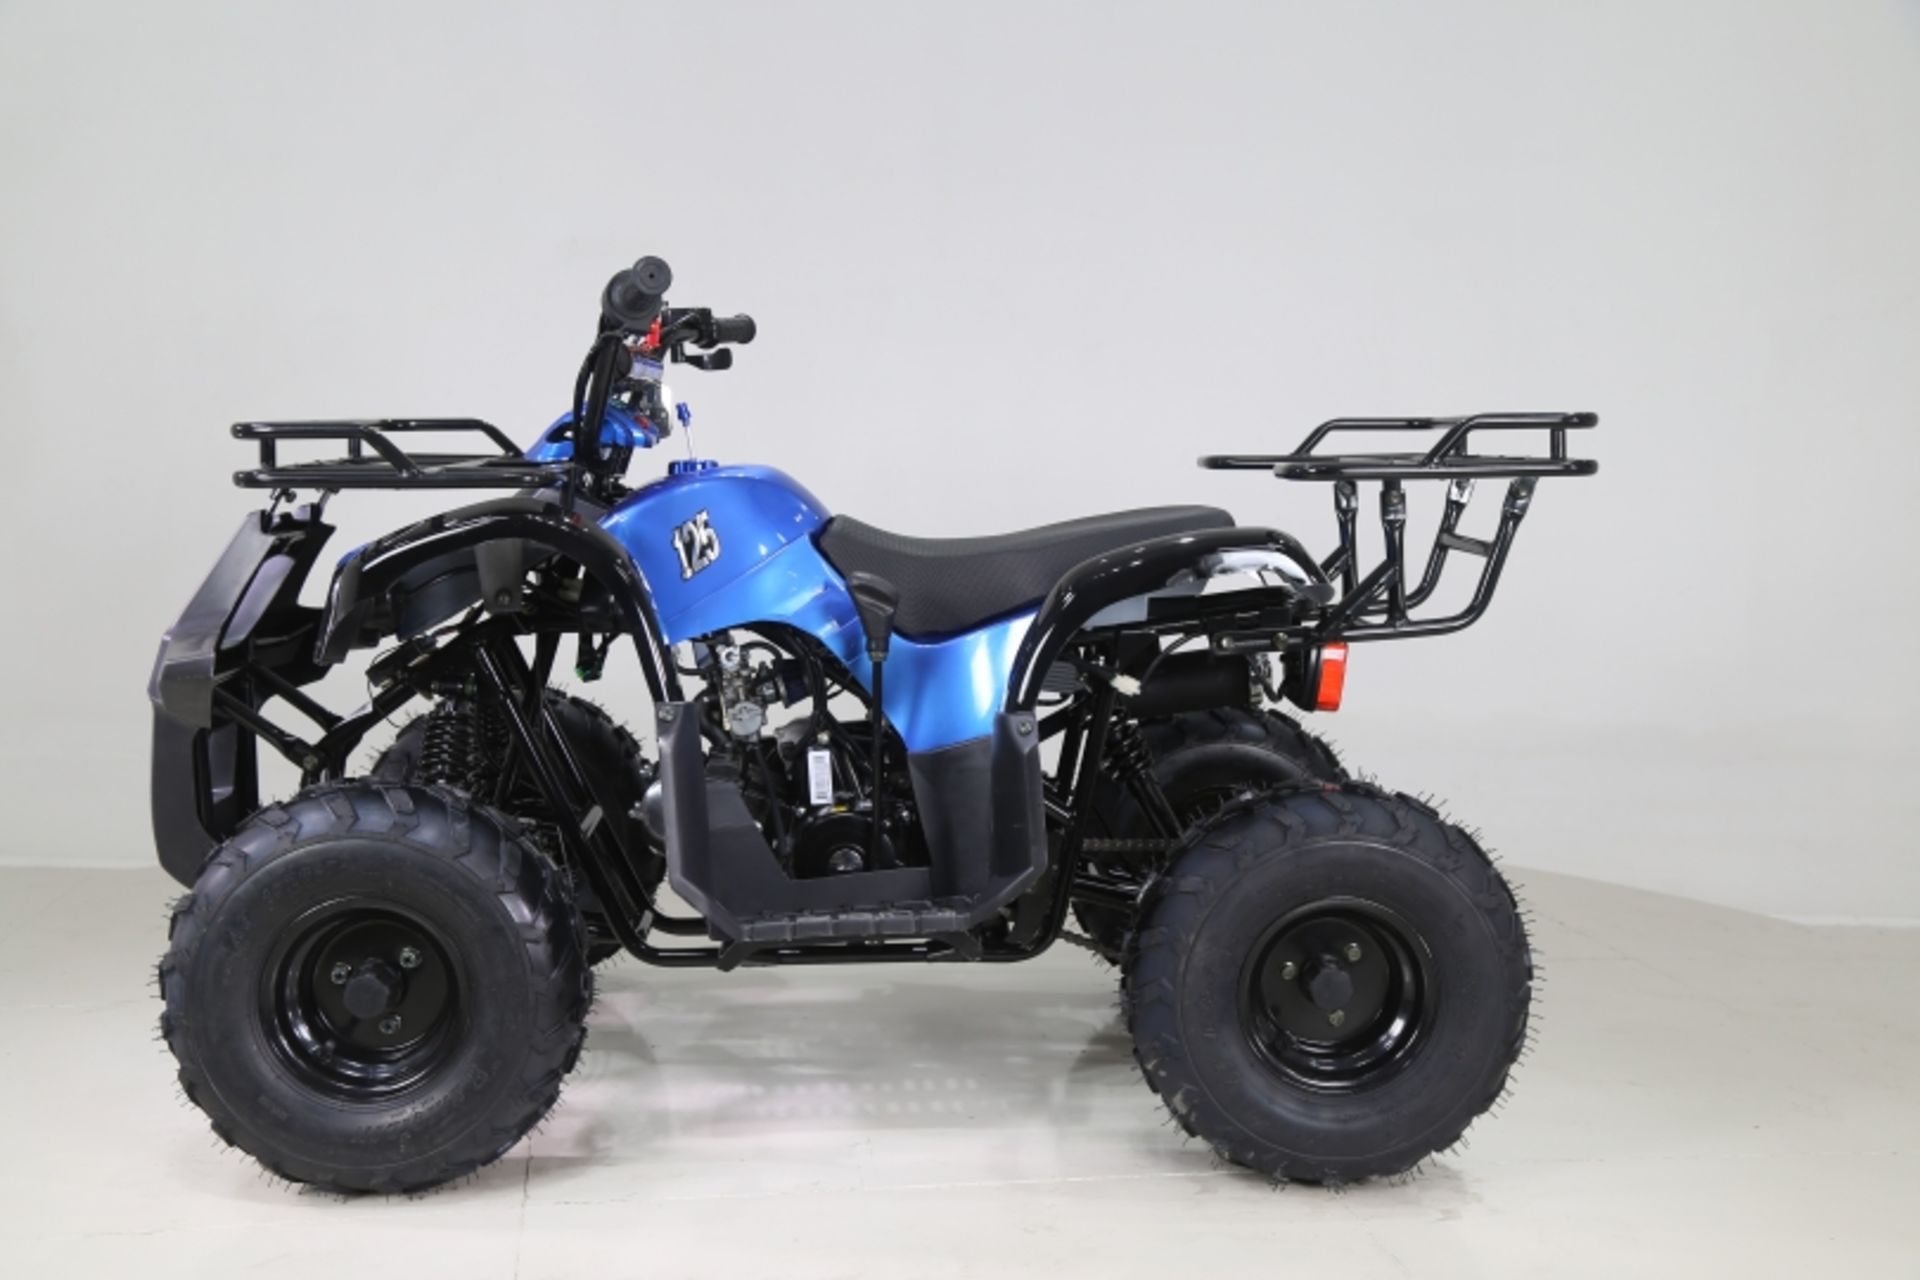 V Brand New 125cc Condo 4 Stroke Quad Bike With Front & Rear Racks - Air Cooled 4 Stroke Honda - Image 2 of 5